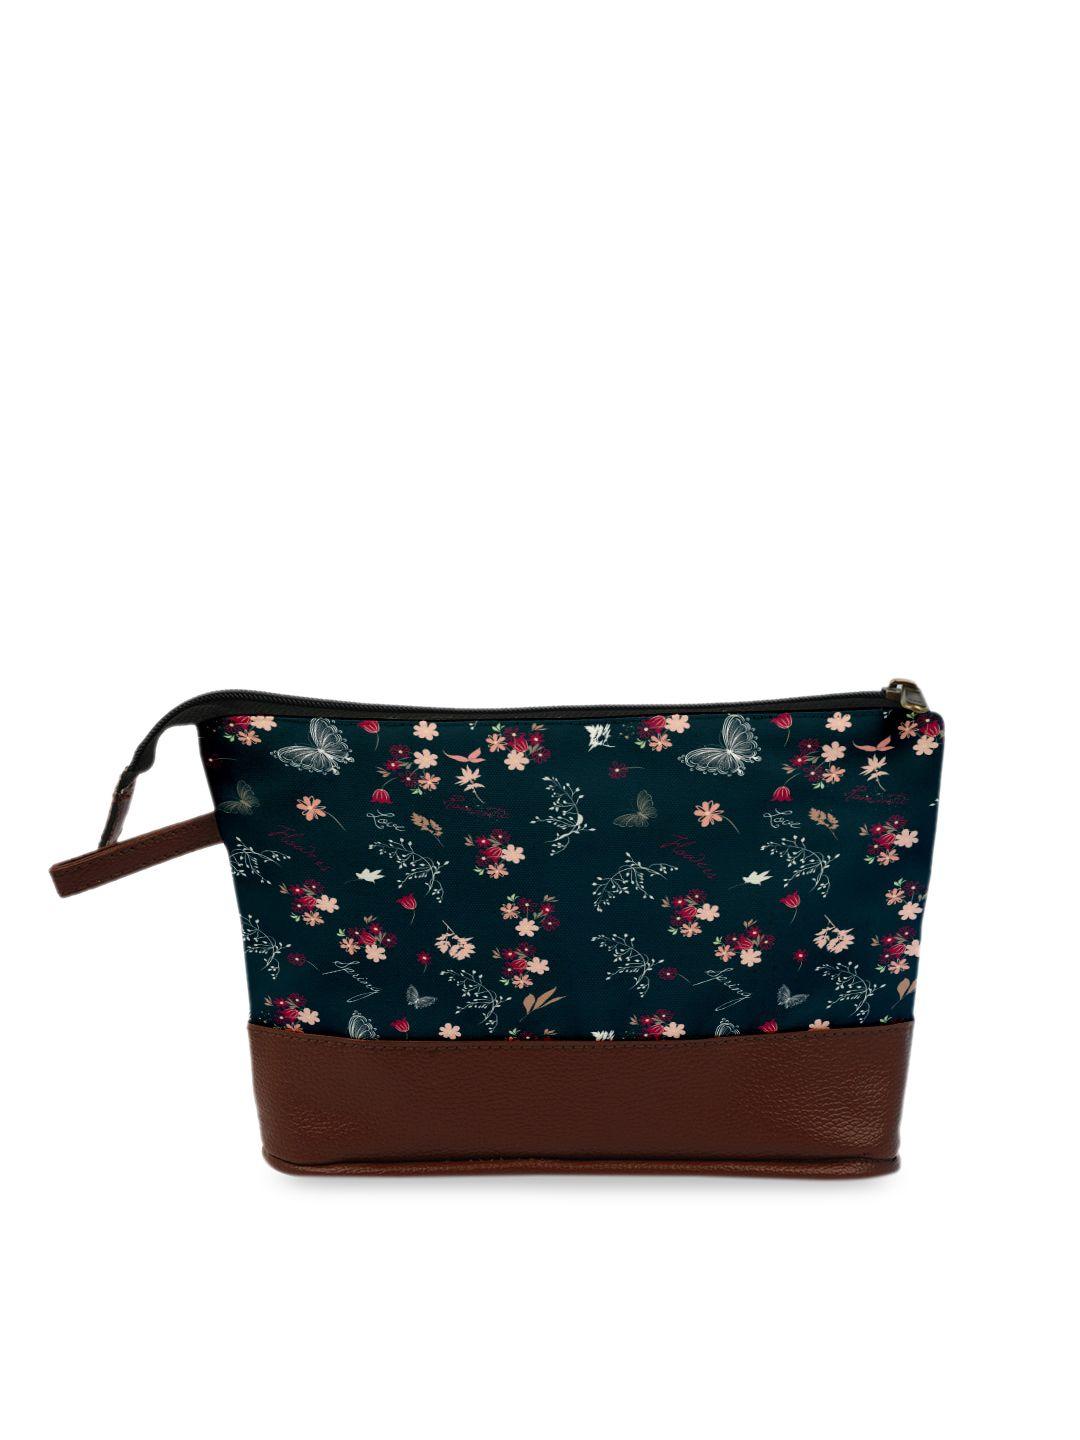 crazy corner teal blue & brown floral printed pu makeup pouch